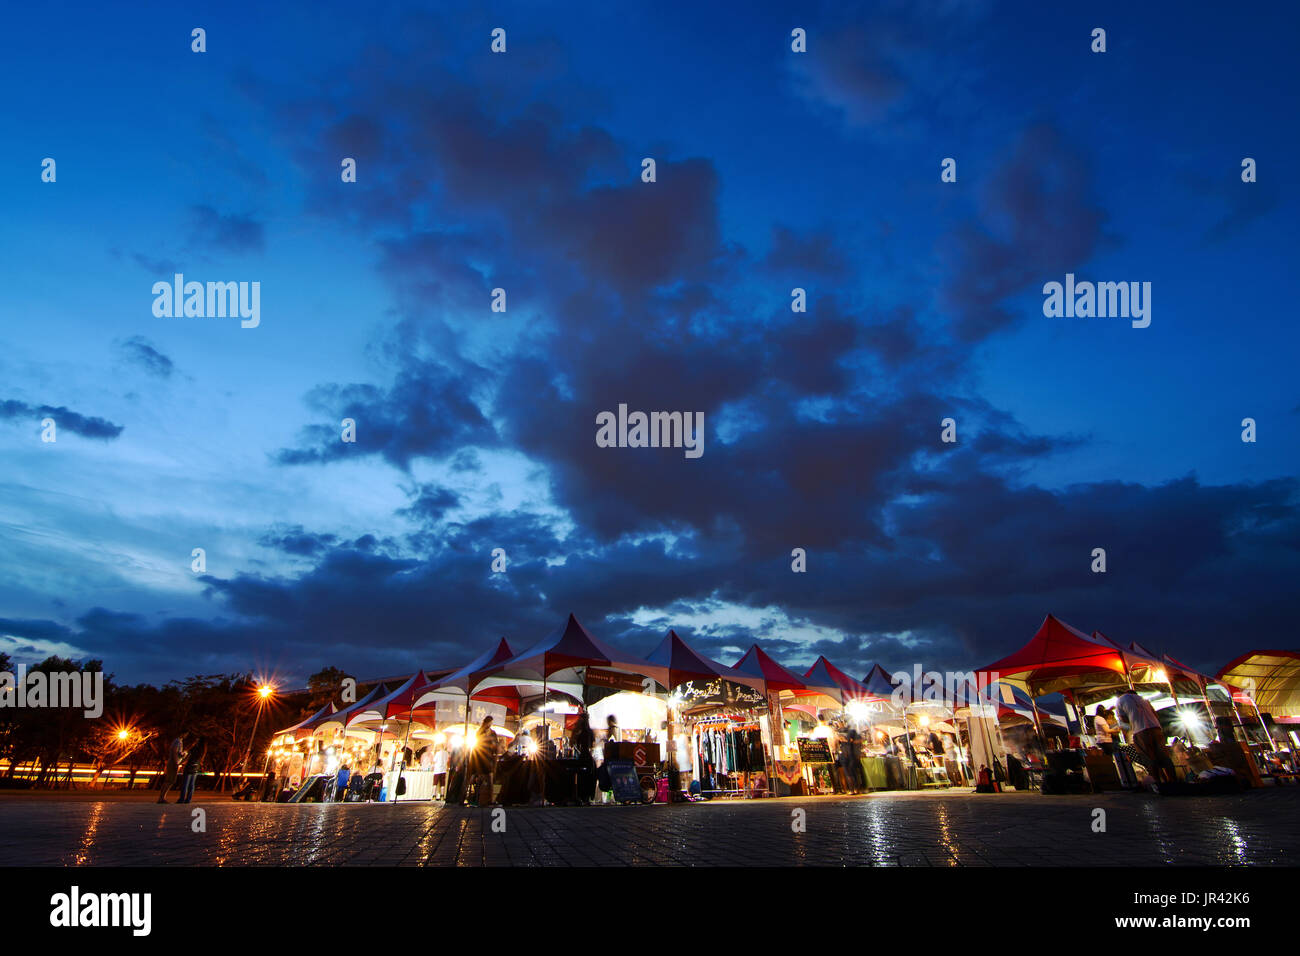 Taipei, Taiwan - JULY 2, 2017 - Vendor tents from the annual Taipei Vegan Frenzy draw food lovers after sunset Stock Photo